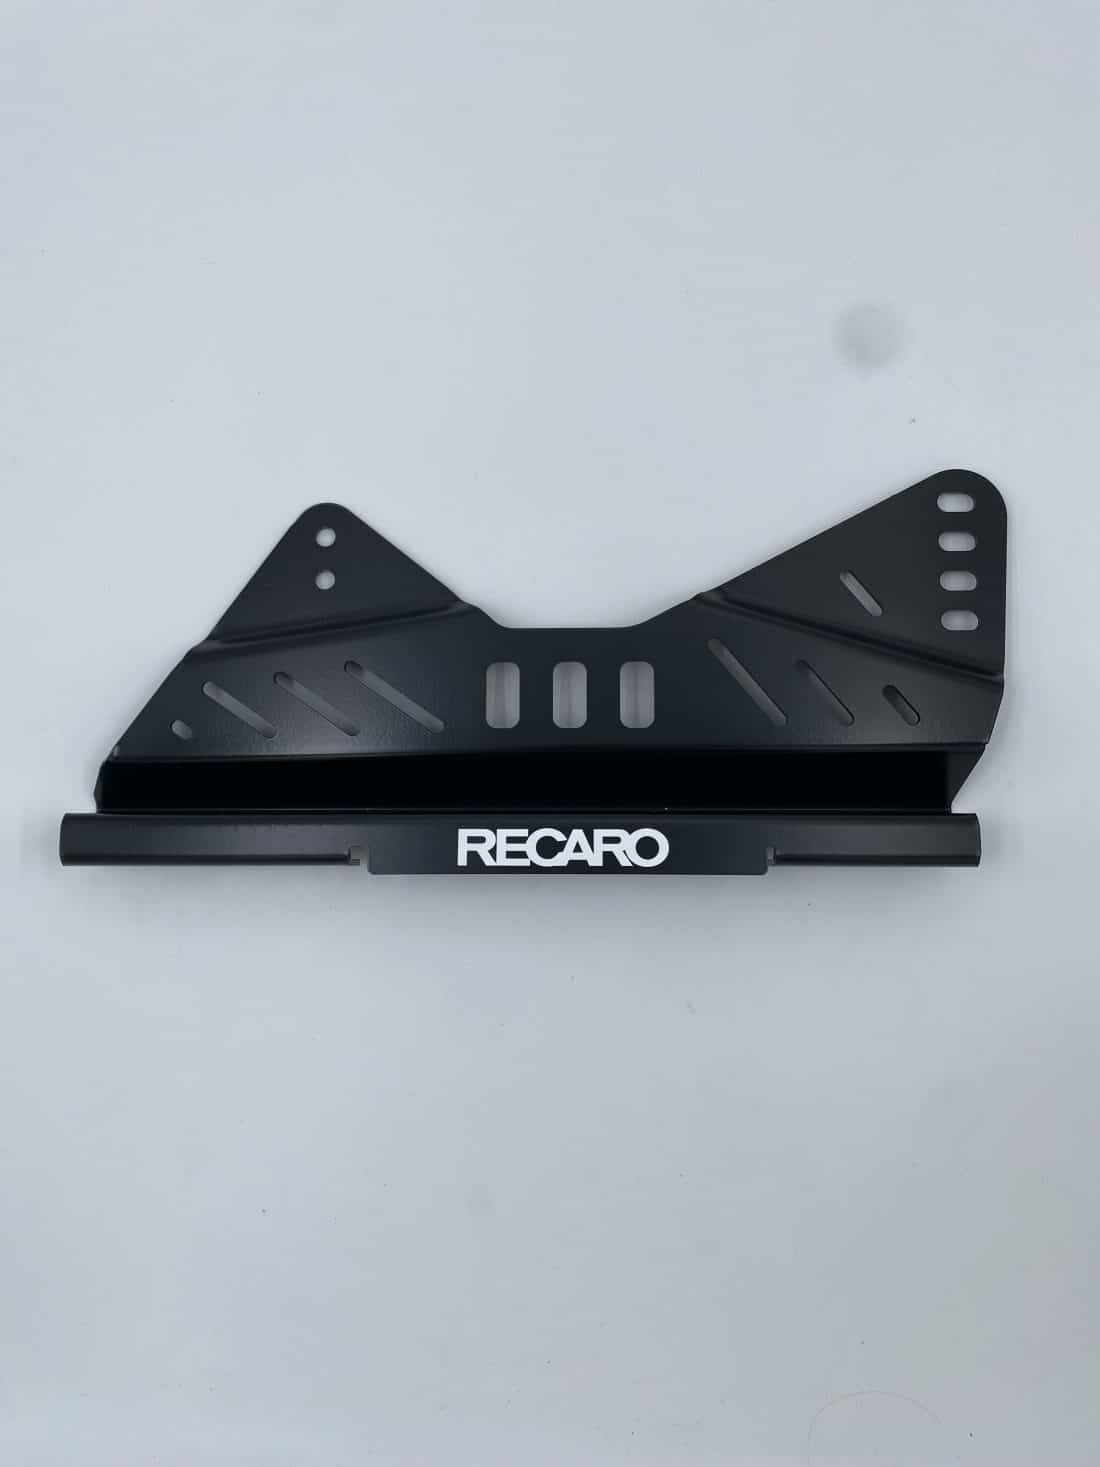 Trp Post Container Data Trp Post Id 13023 Recaro Steel Adapter Podium Abe 5219908 Trp Post Container